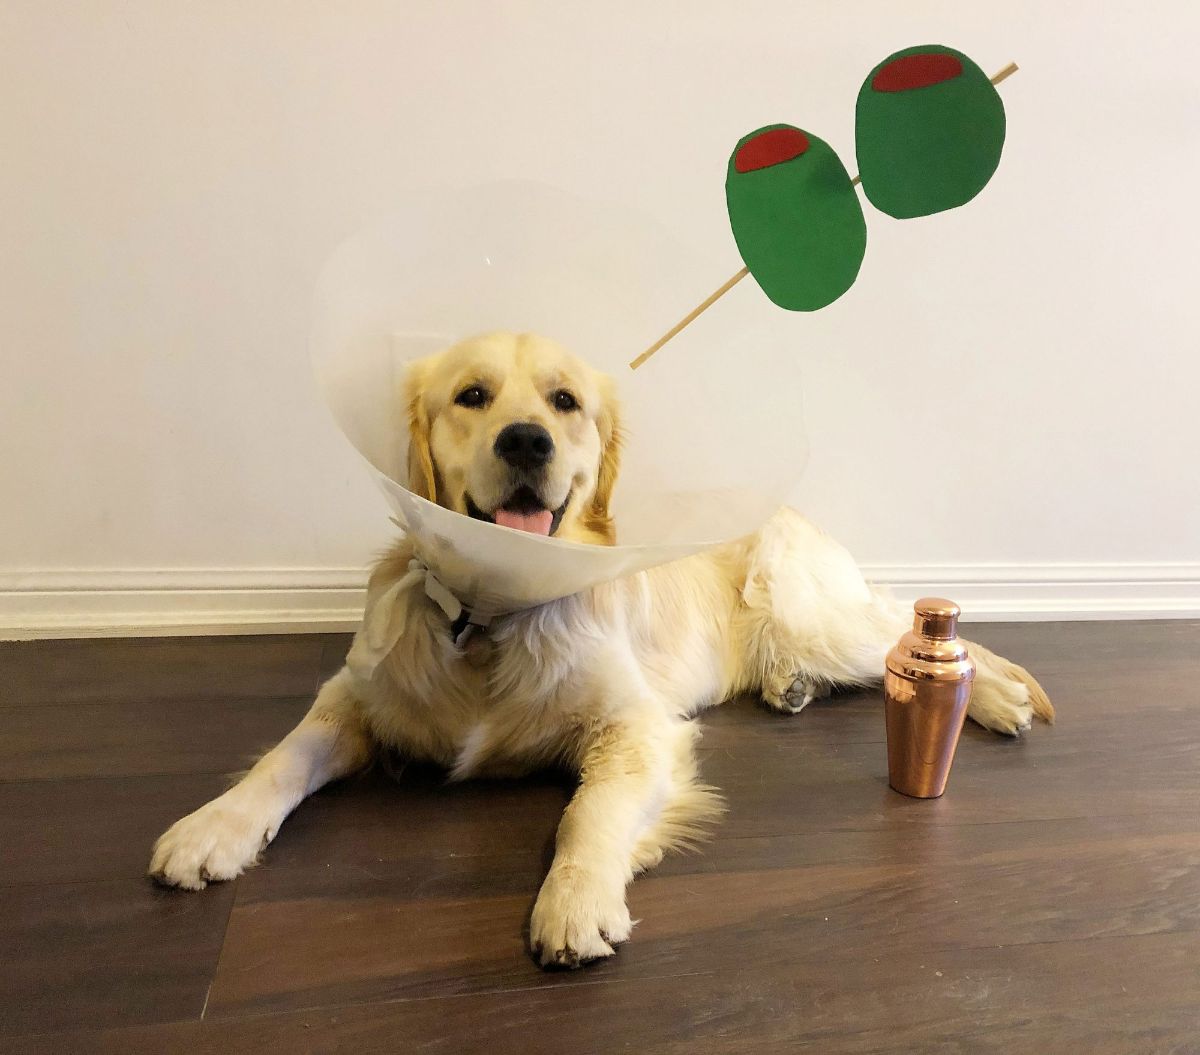 golden retriever laying on the floor in white cone of shame with wooden stick with cardboard green and red olives with a rose gold shaker on the floor